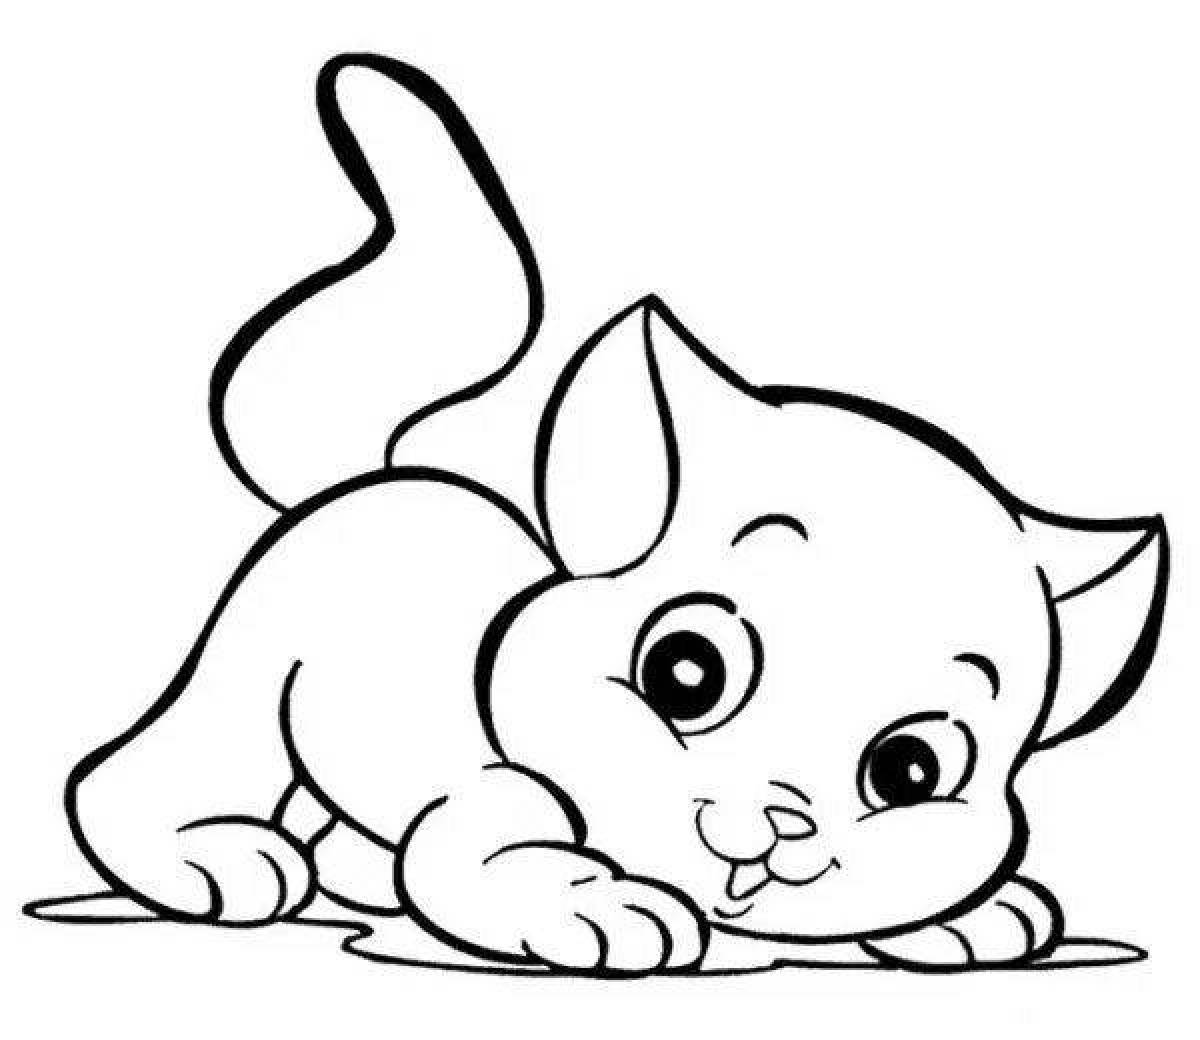 Kitty glitter coloring book for kids